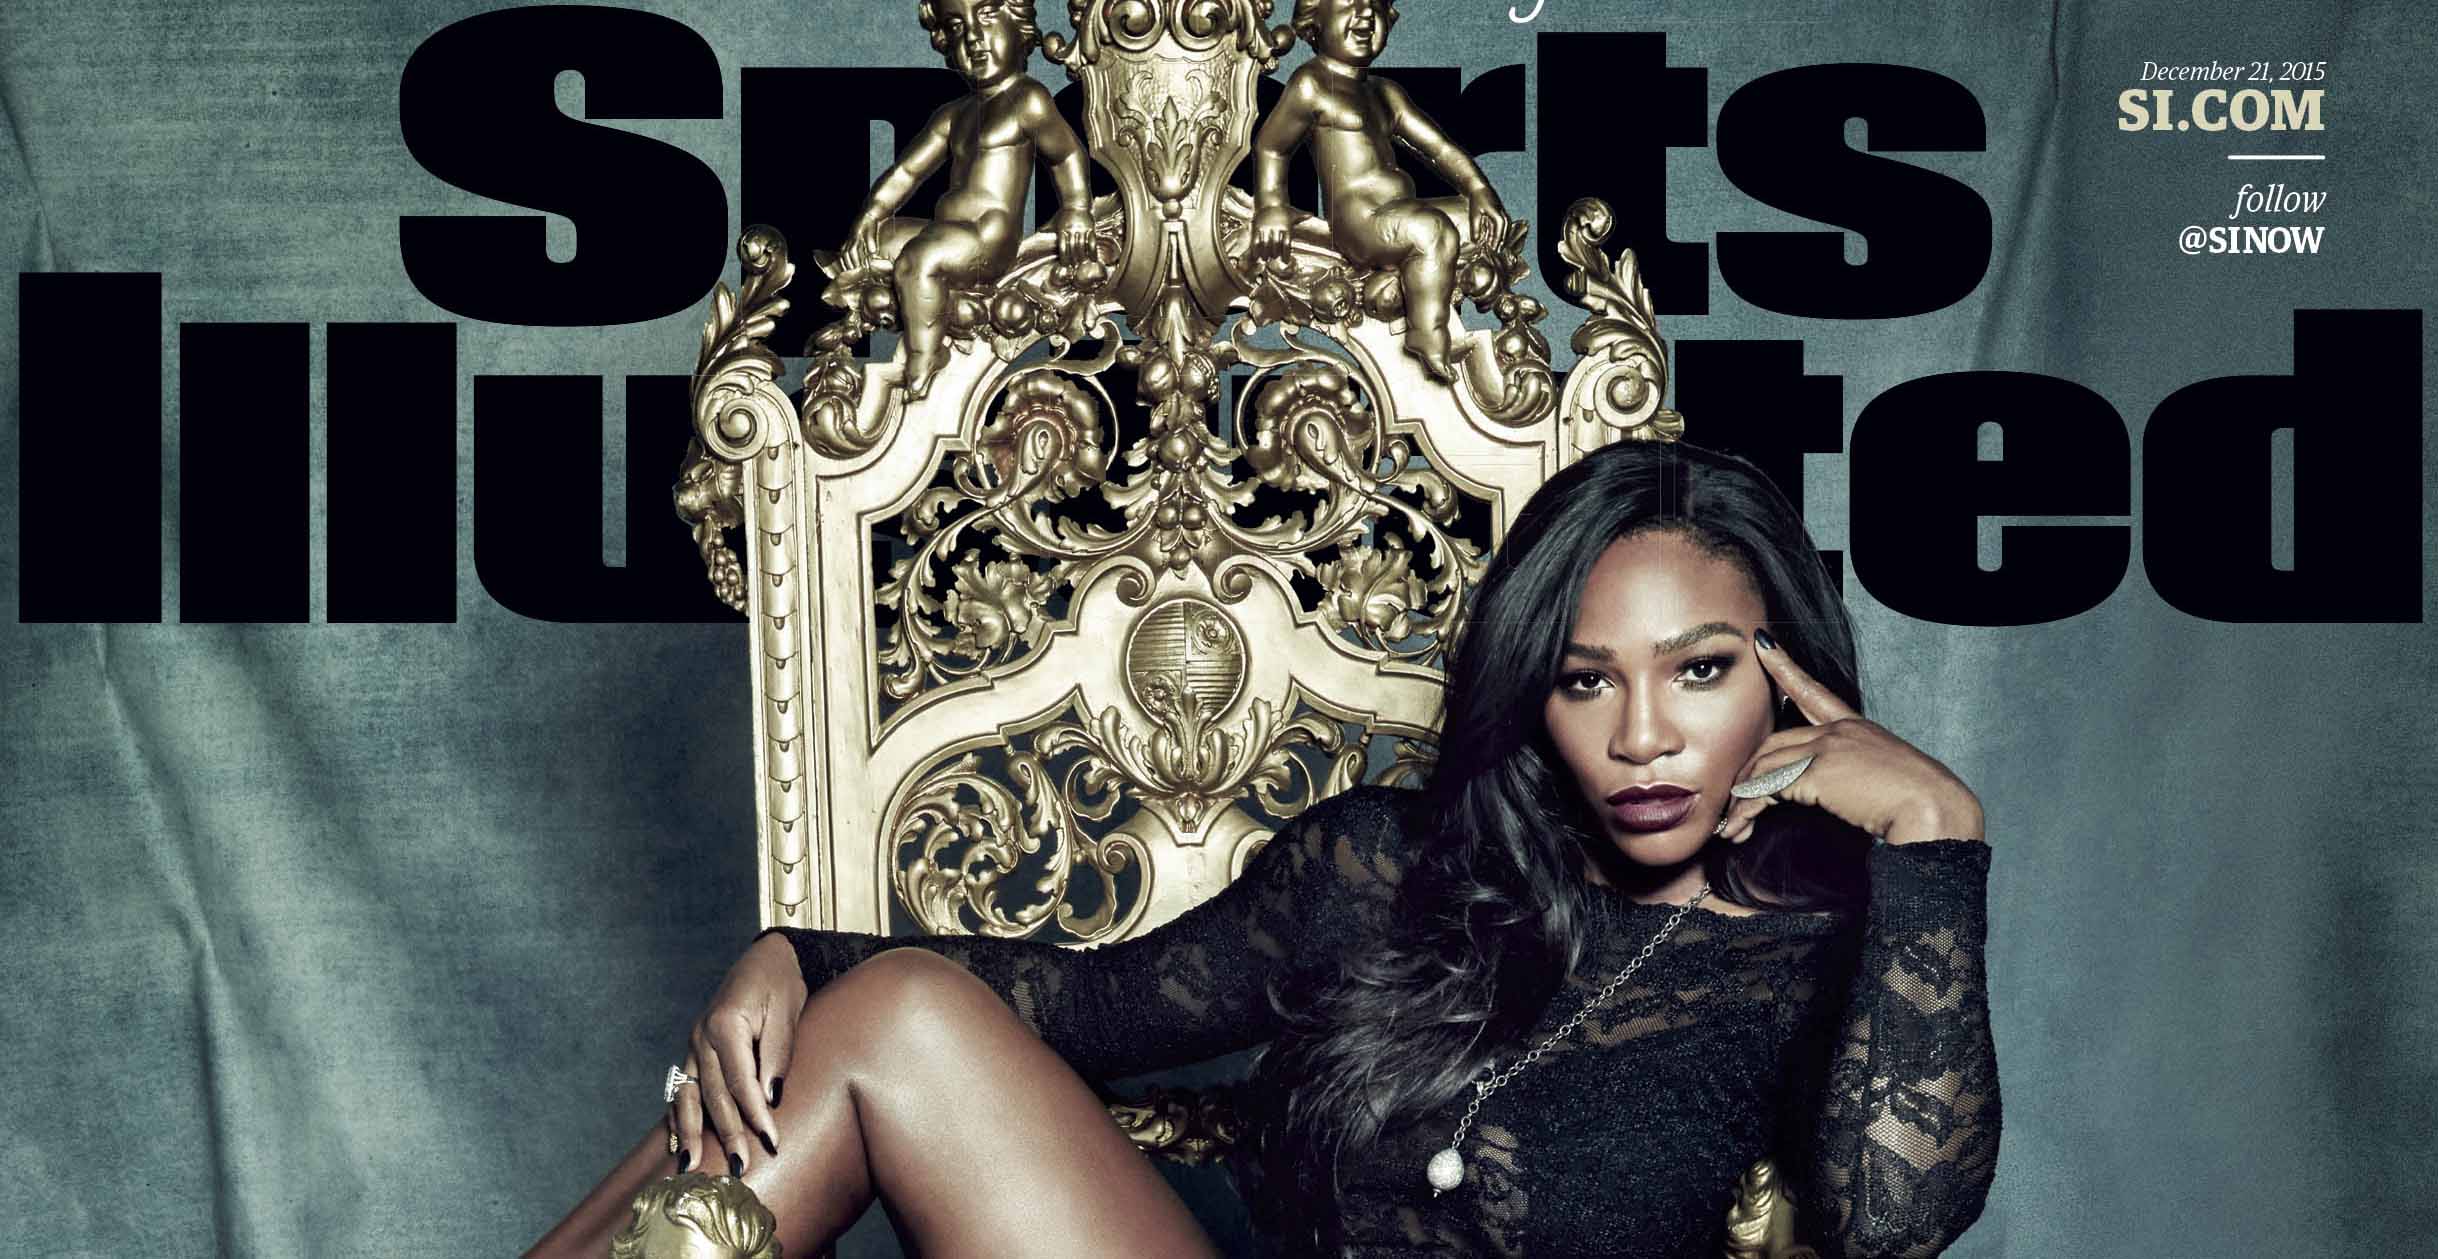 Sportsperson of the year Serena Williams